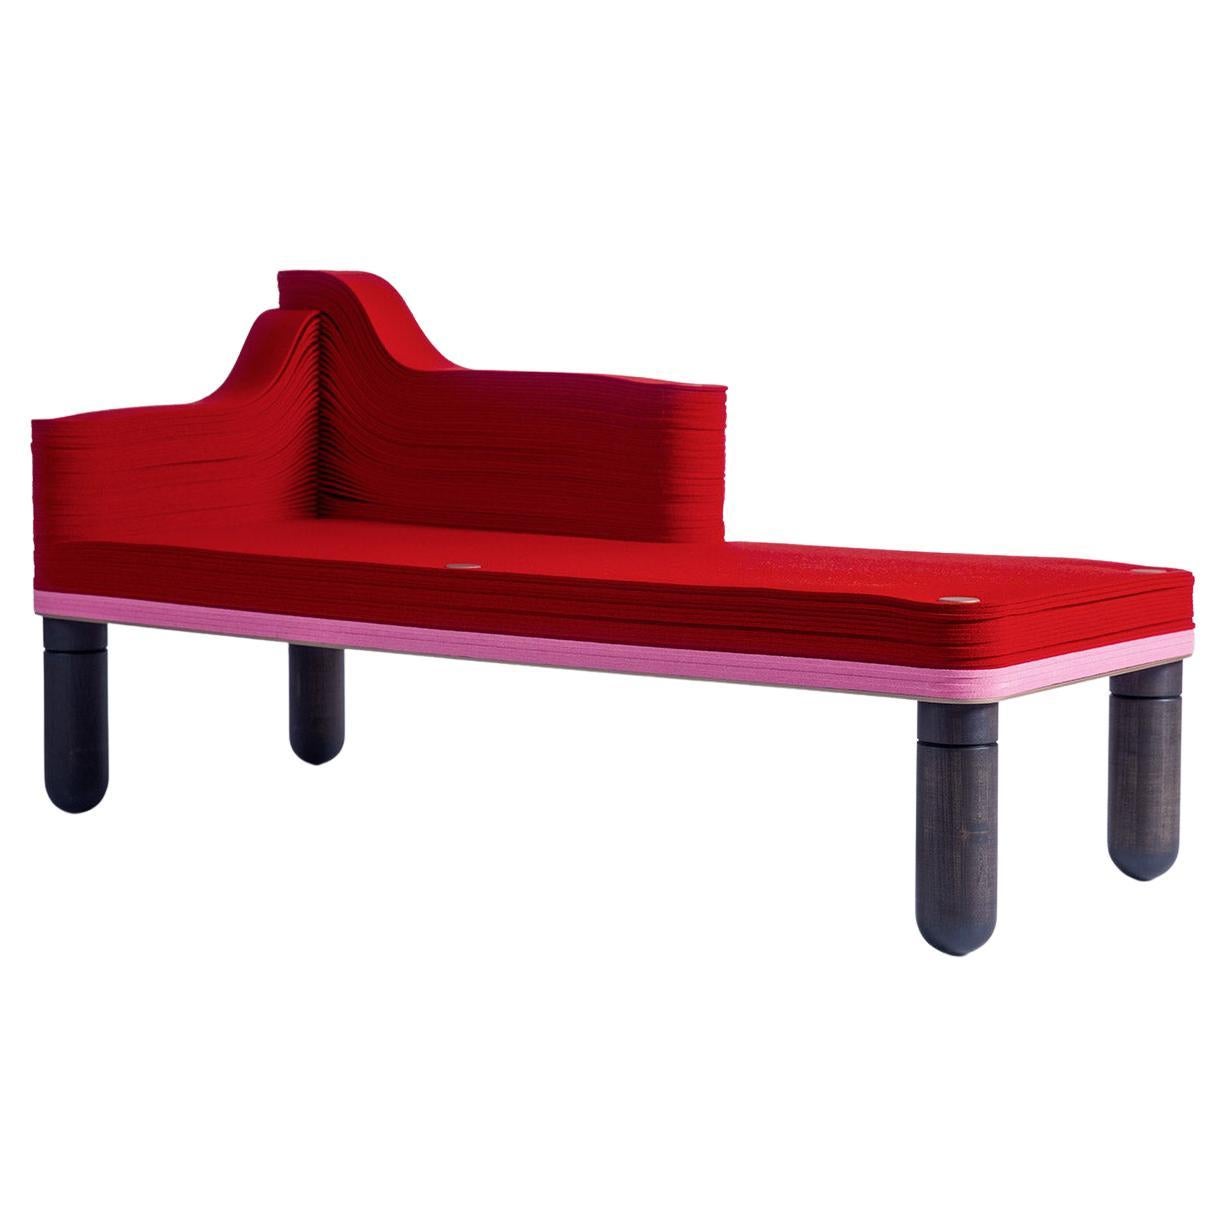 Madame C, Felt and Wood Chaise Lounge, Drake / Anderson in Stackabl